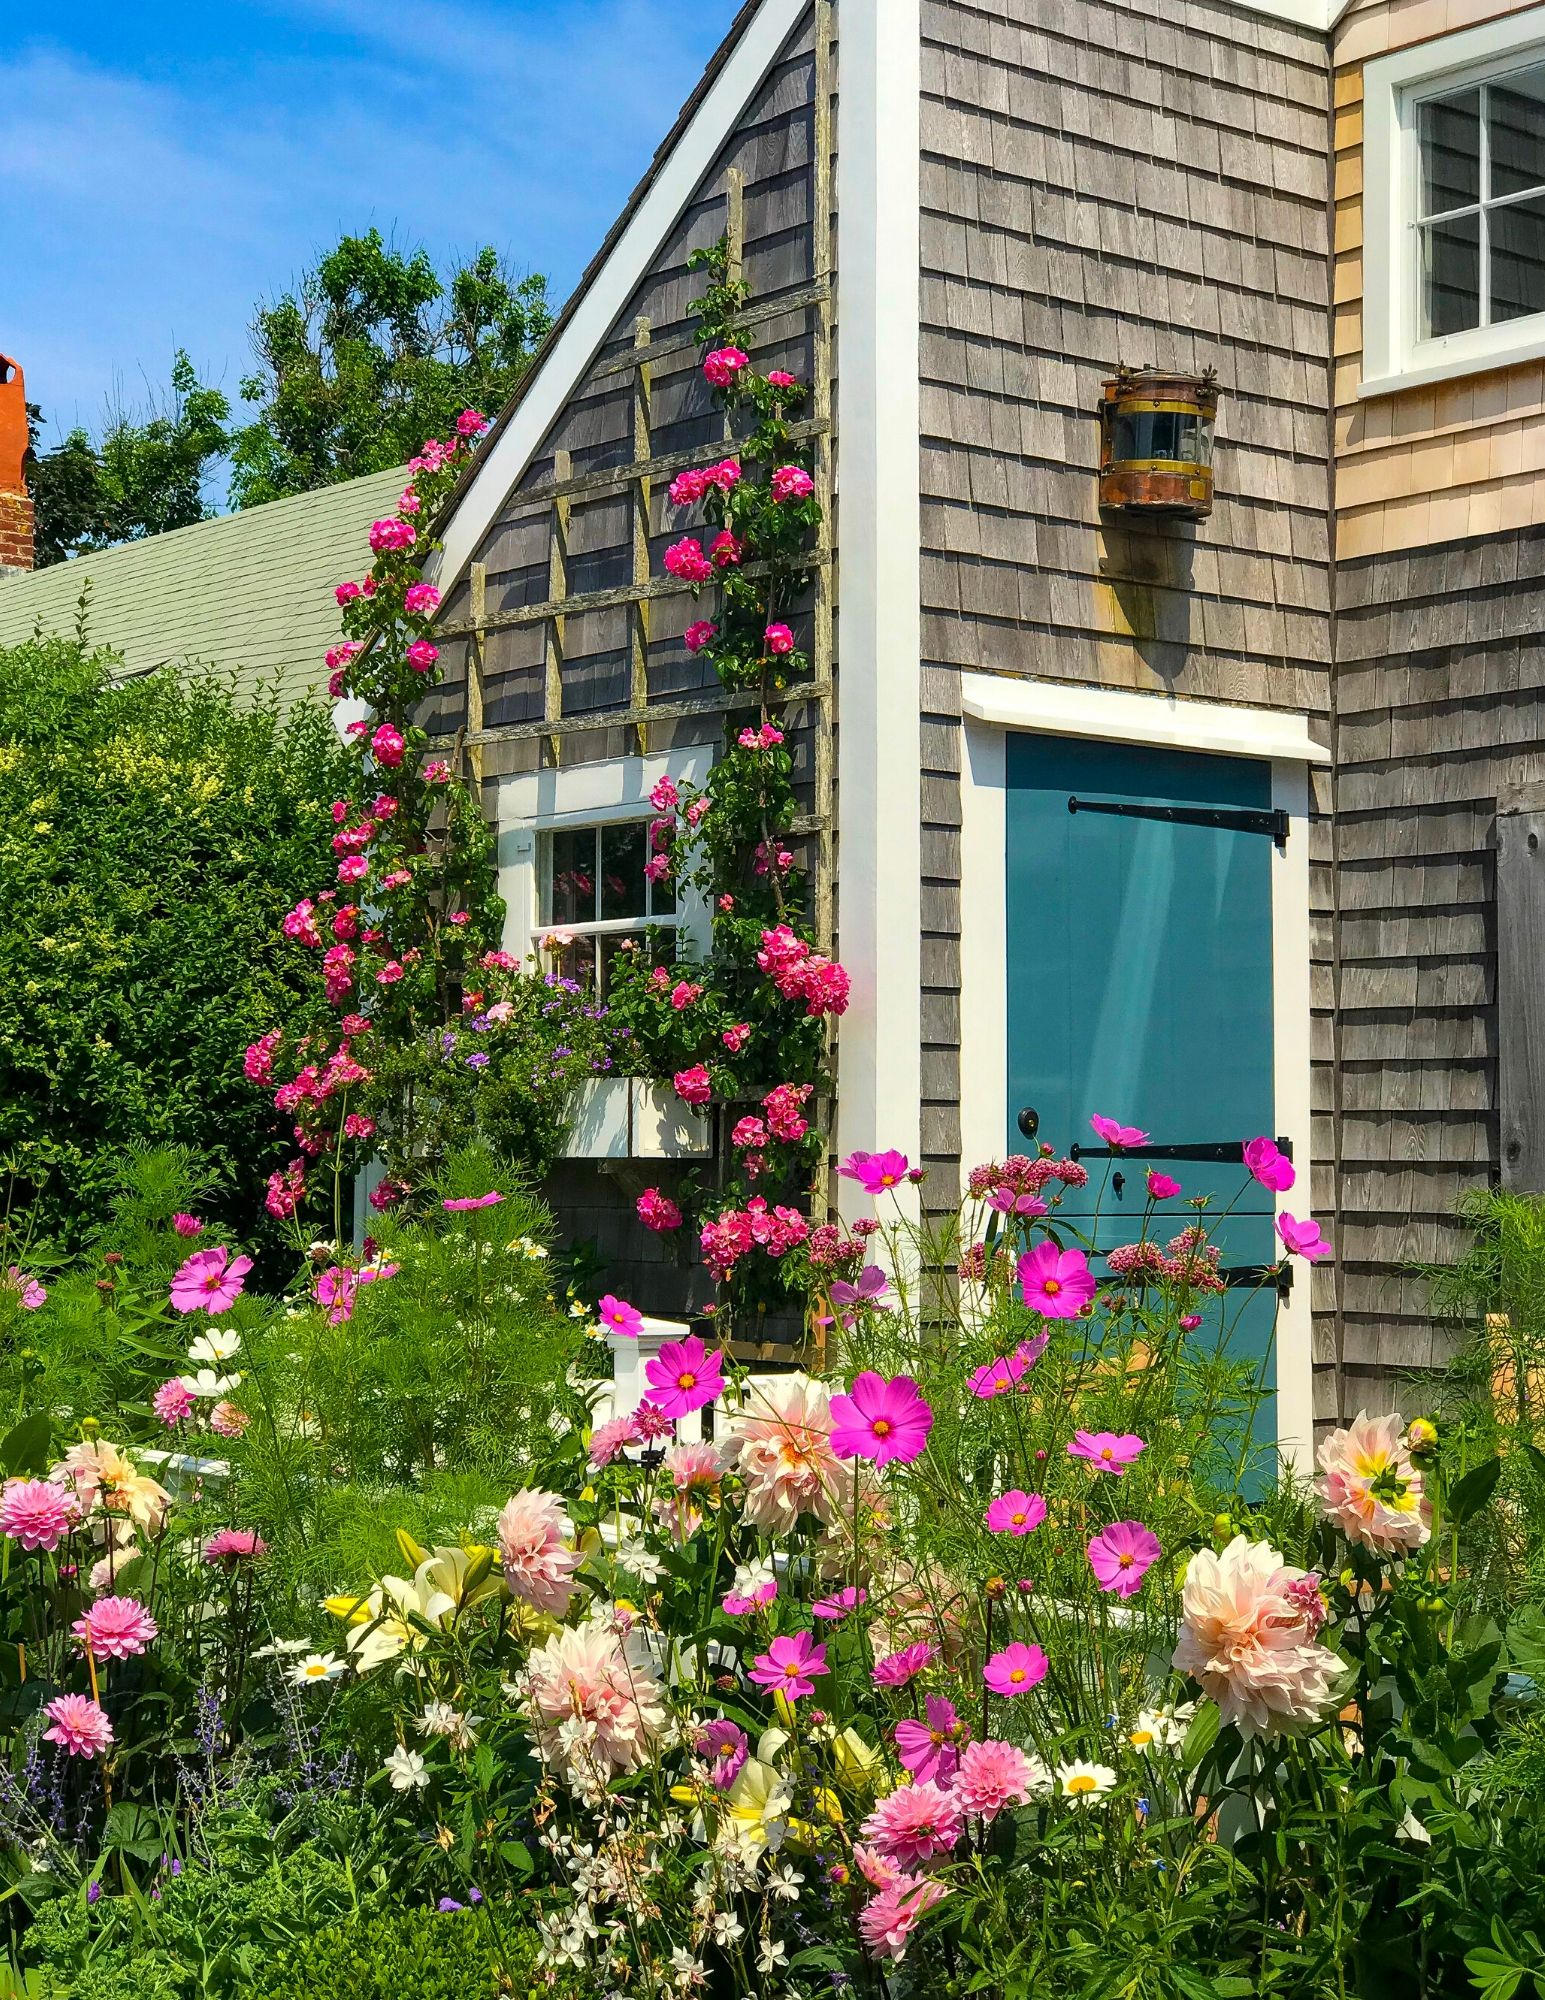 Nantucket Rose Covered Cottages in Sconset-21